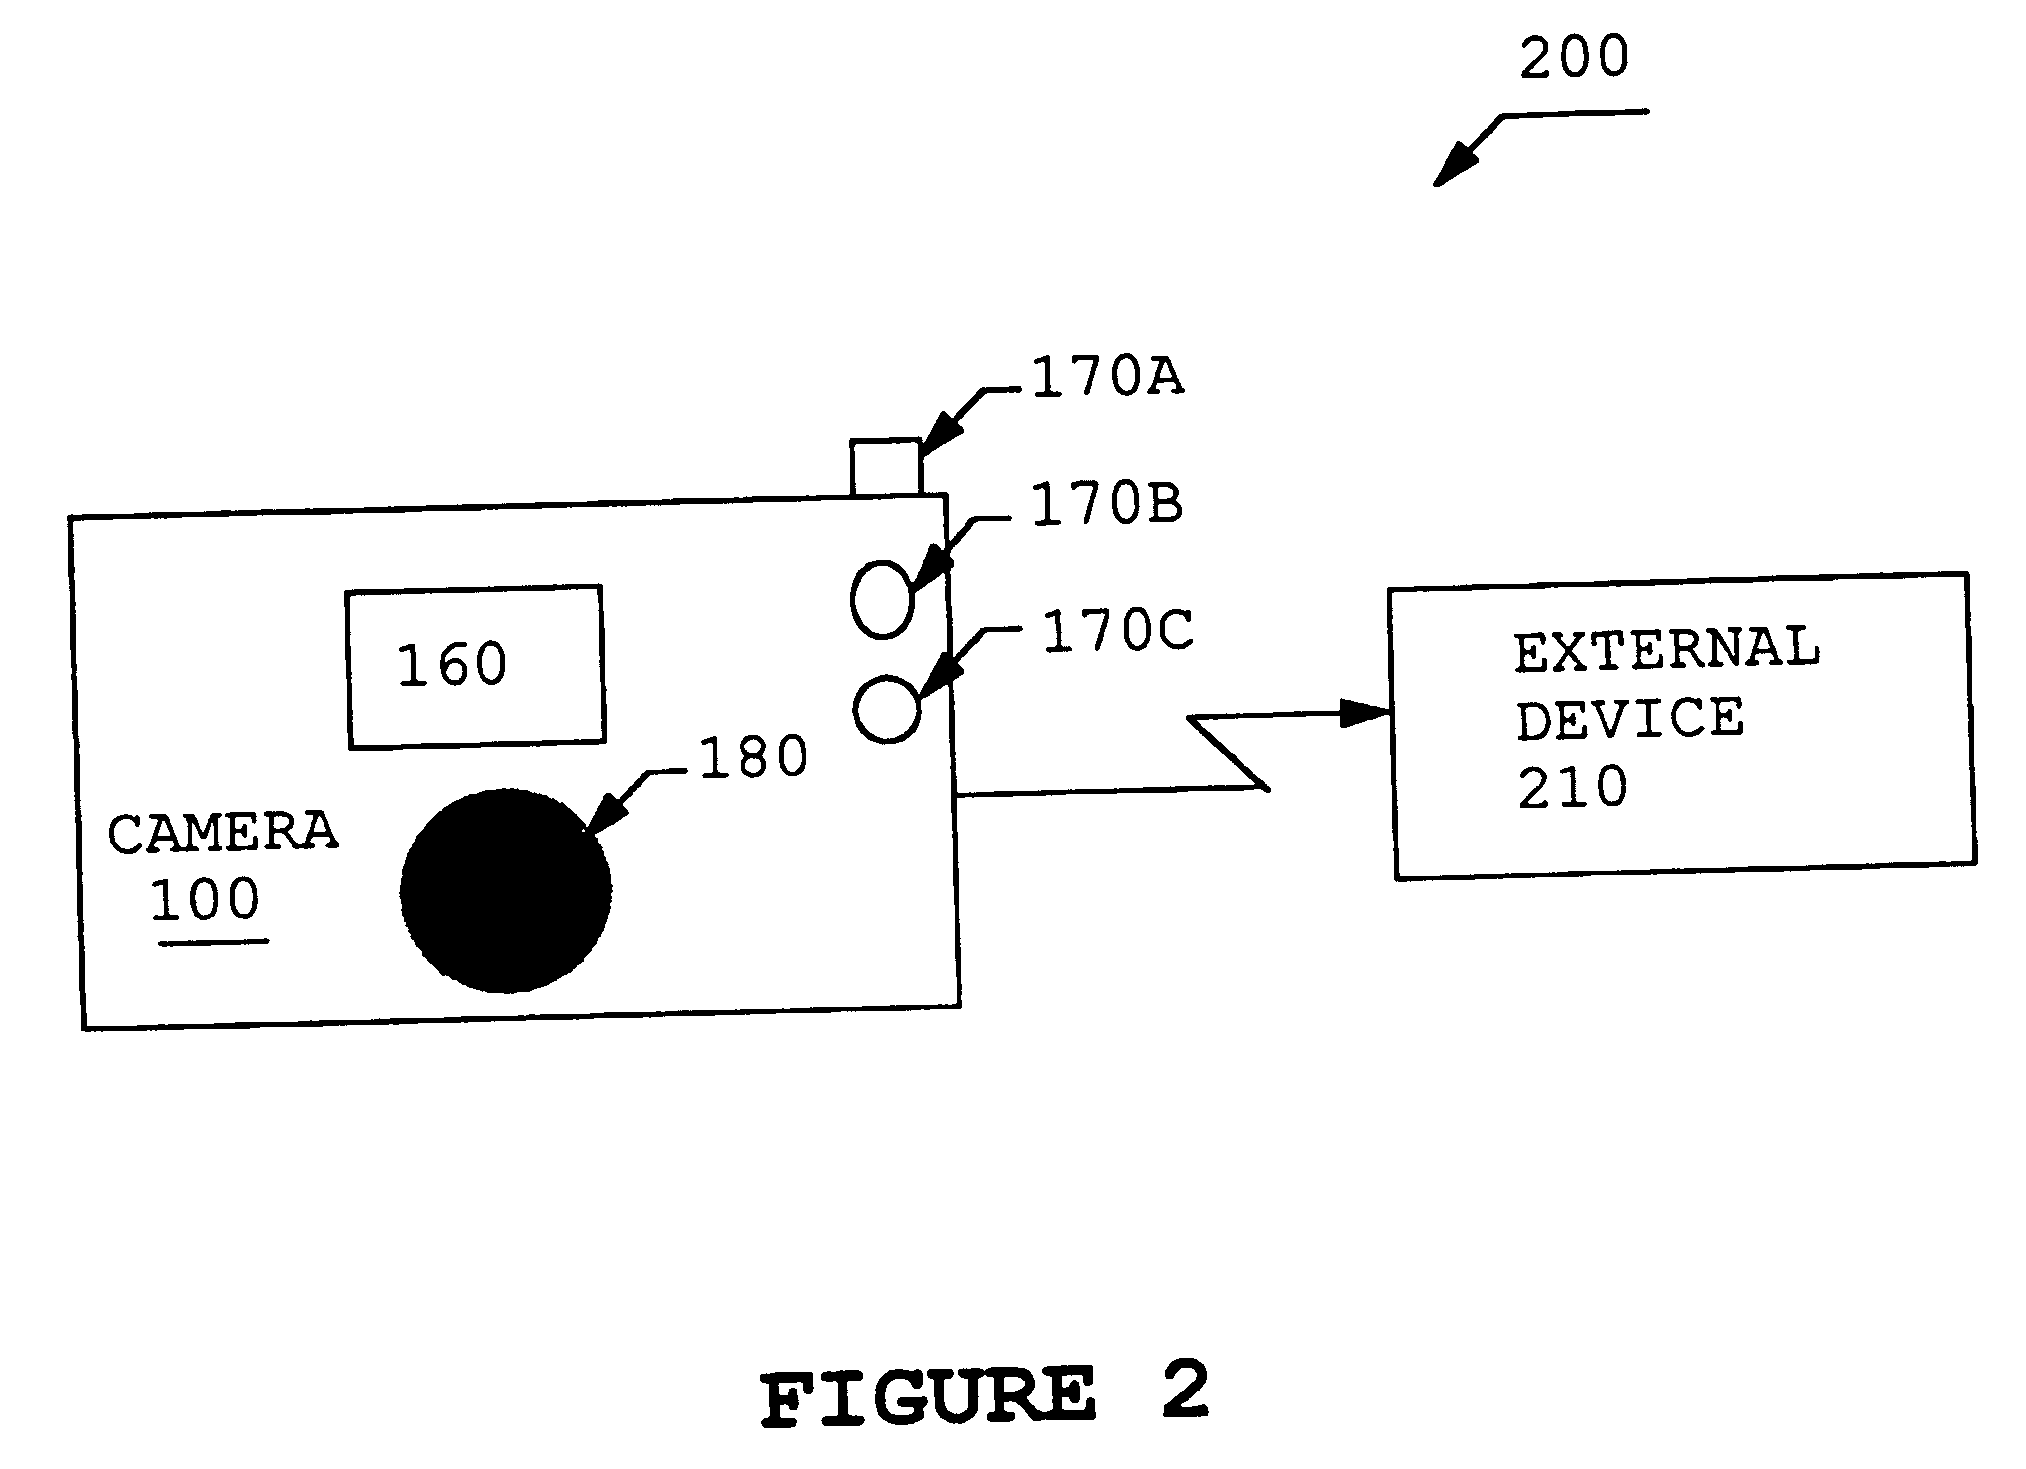 Pointing device for digital camera display